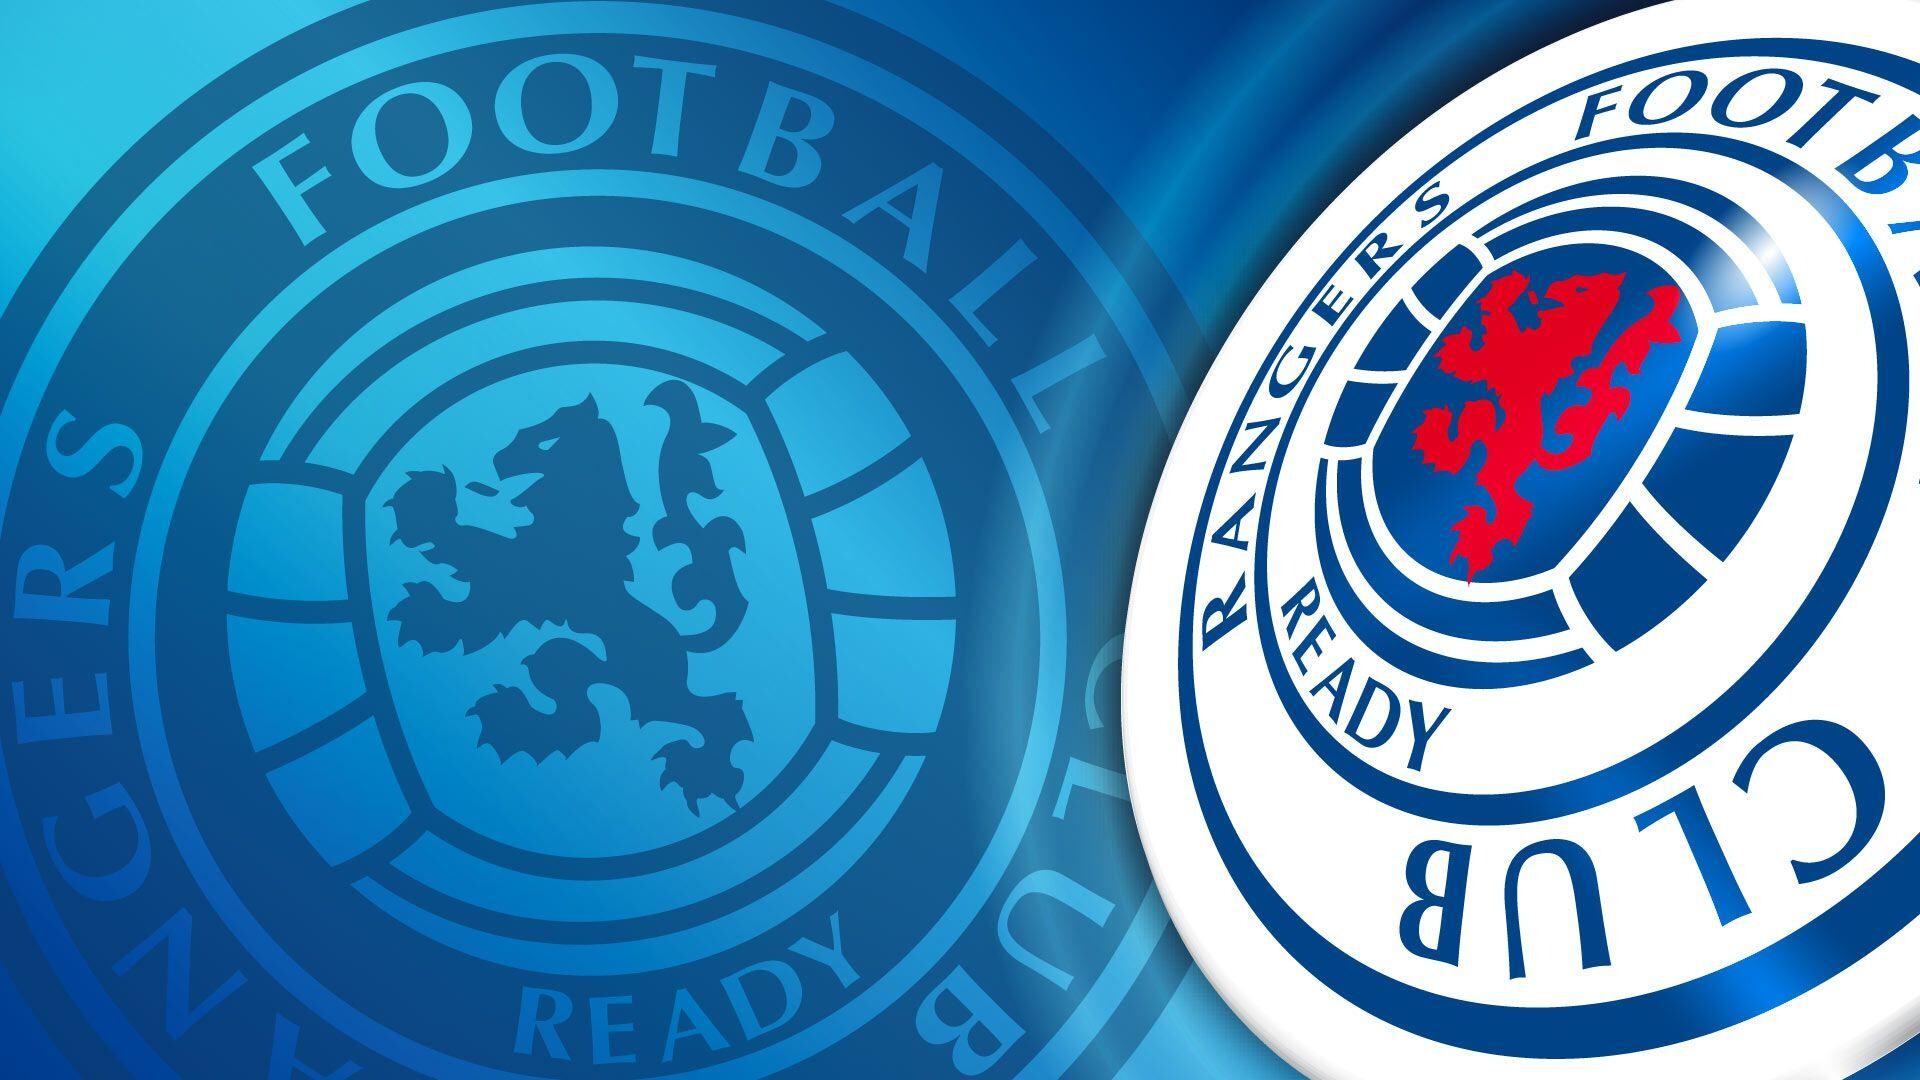 Rangers F.C.: One of the 11 original members of the Scottish Football League, Ready. 1920x1080 Full HD Wallpaper.